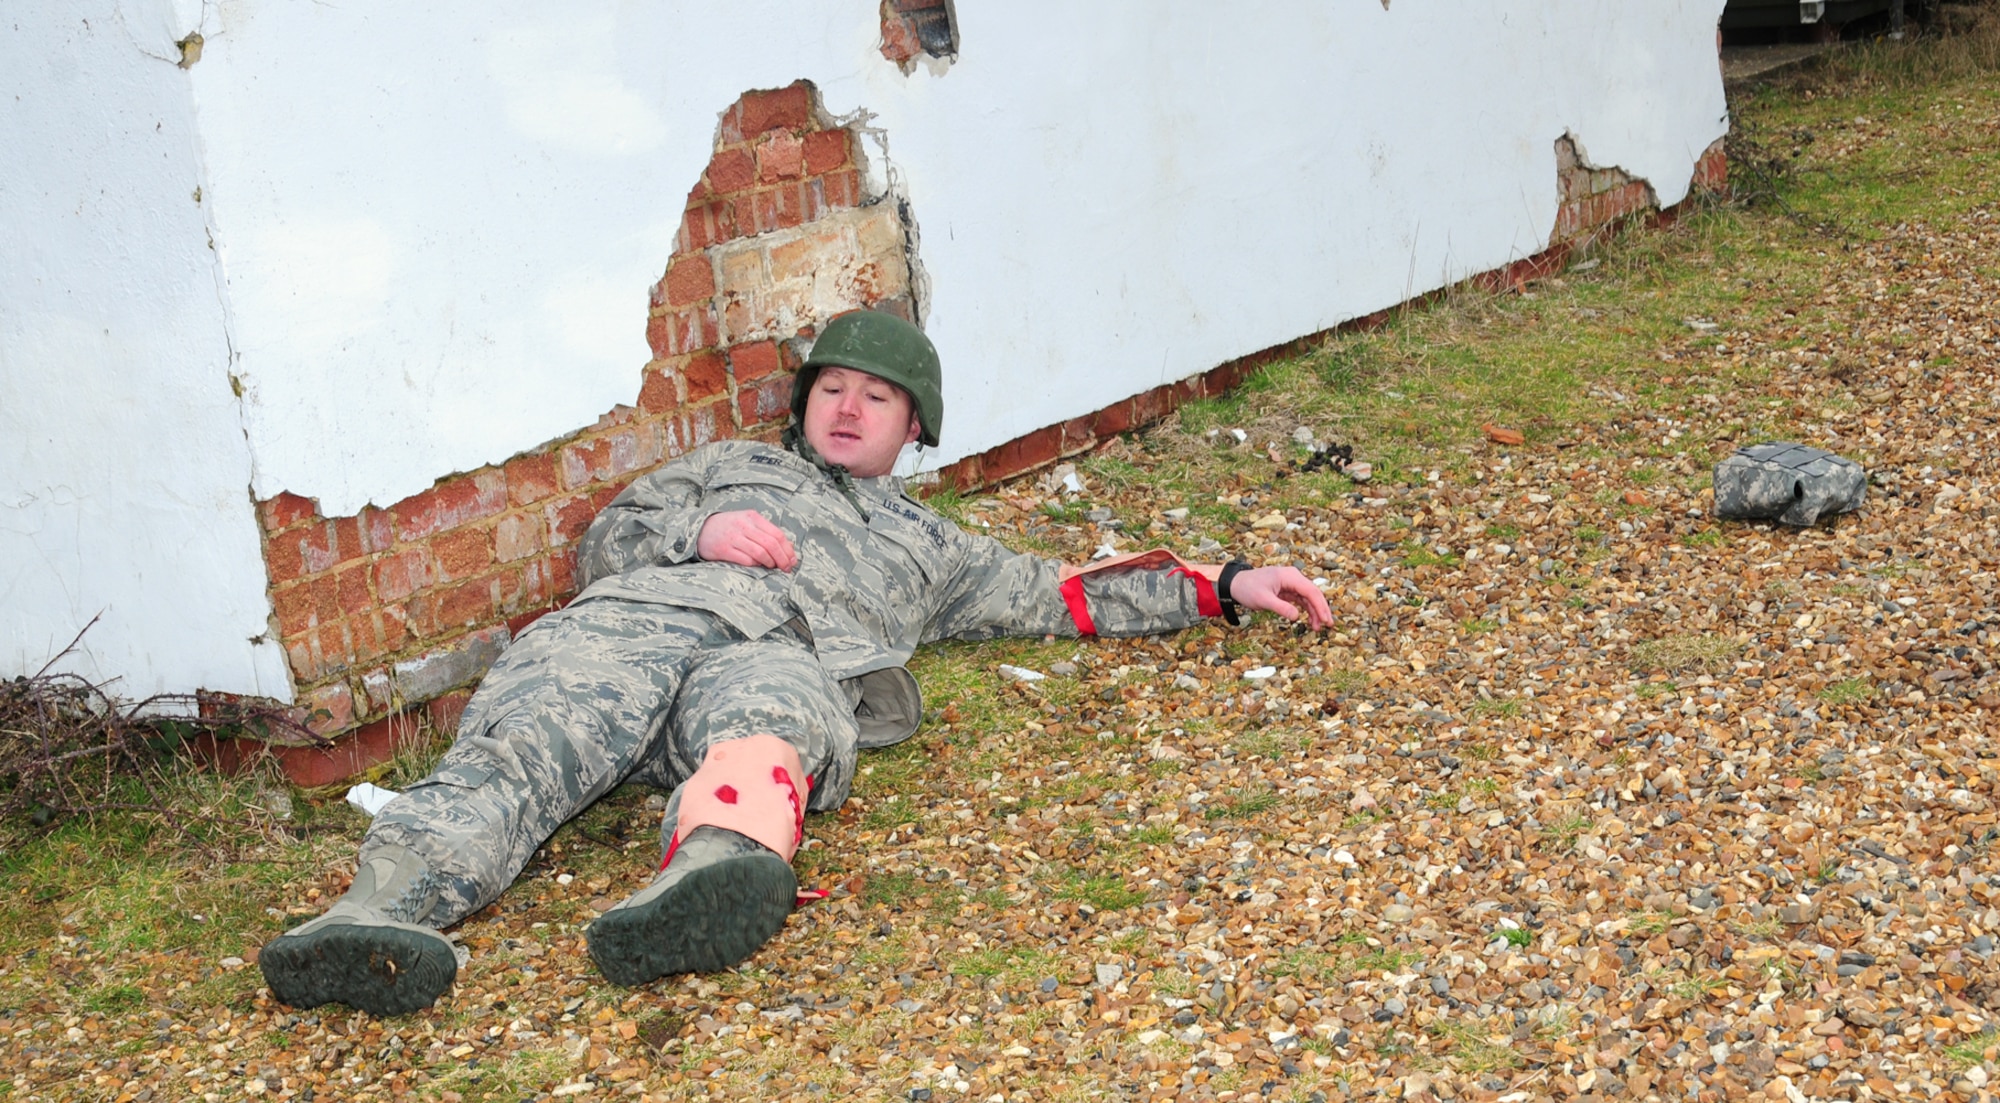 Master Sgt. Scott Piper, 352nd Special Operations Support Squadron Medical Element flight chief, from Las Vegas, plays the role of a casualty in field conditions awaiting British Army Joint Tactical Air Controllers to find him and provide medical treatment during a training scenario March 6, 2013, at Stanford Training Area, near Thetford, England. Piper and other U.S. Air Force members from the 352nd SOSS spent time conducting combat medical refresher training as an ancillary part of a U.K. exercise held at STANTA range. (U.S. Air Force photo by Karen Abeyasekere/Released)